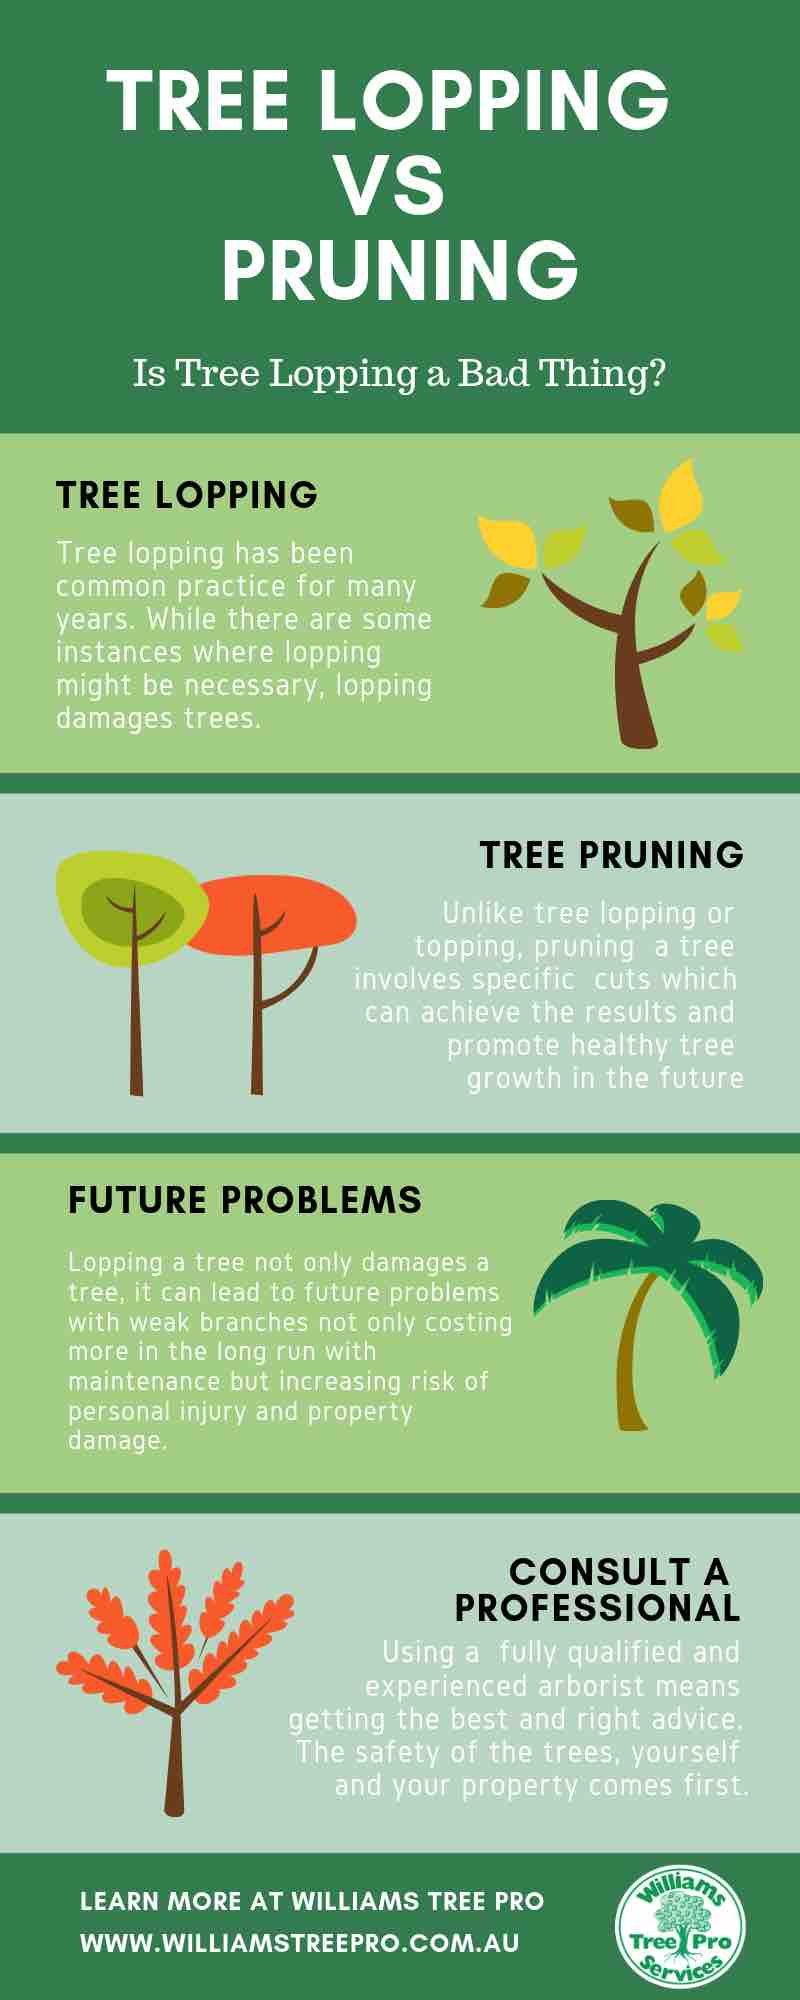 The Benefits of Tree Lopping